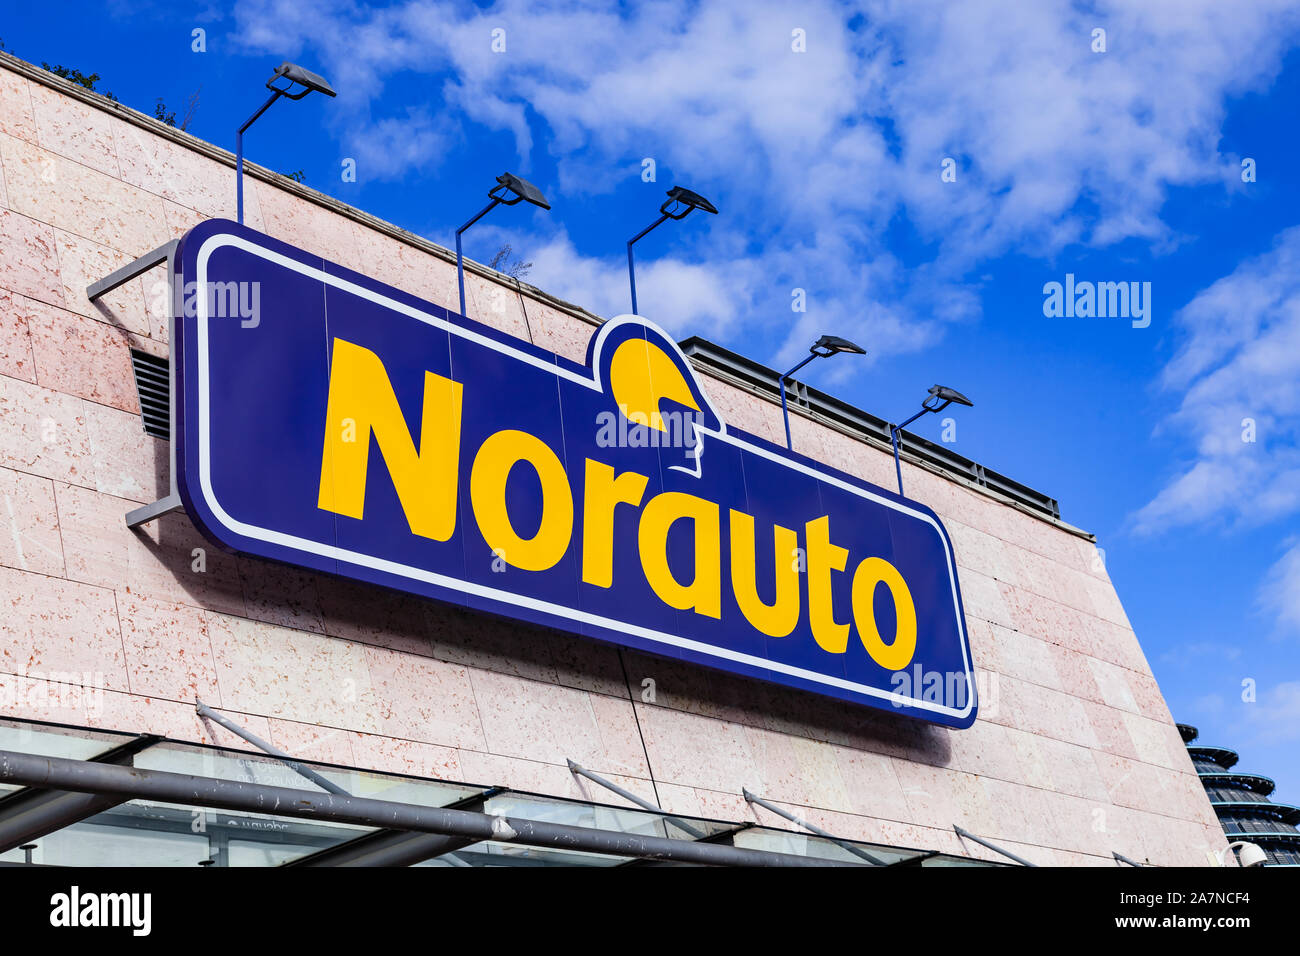 Almada, Portugal. Signboard of Norauto car or auto parts shop and service station or auto repair shop in Almada Forum shopping mall or center. Norauto Stock Photo